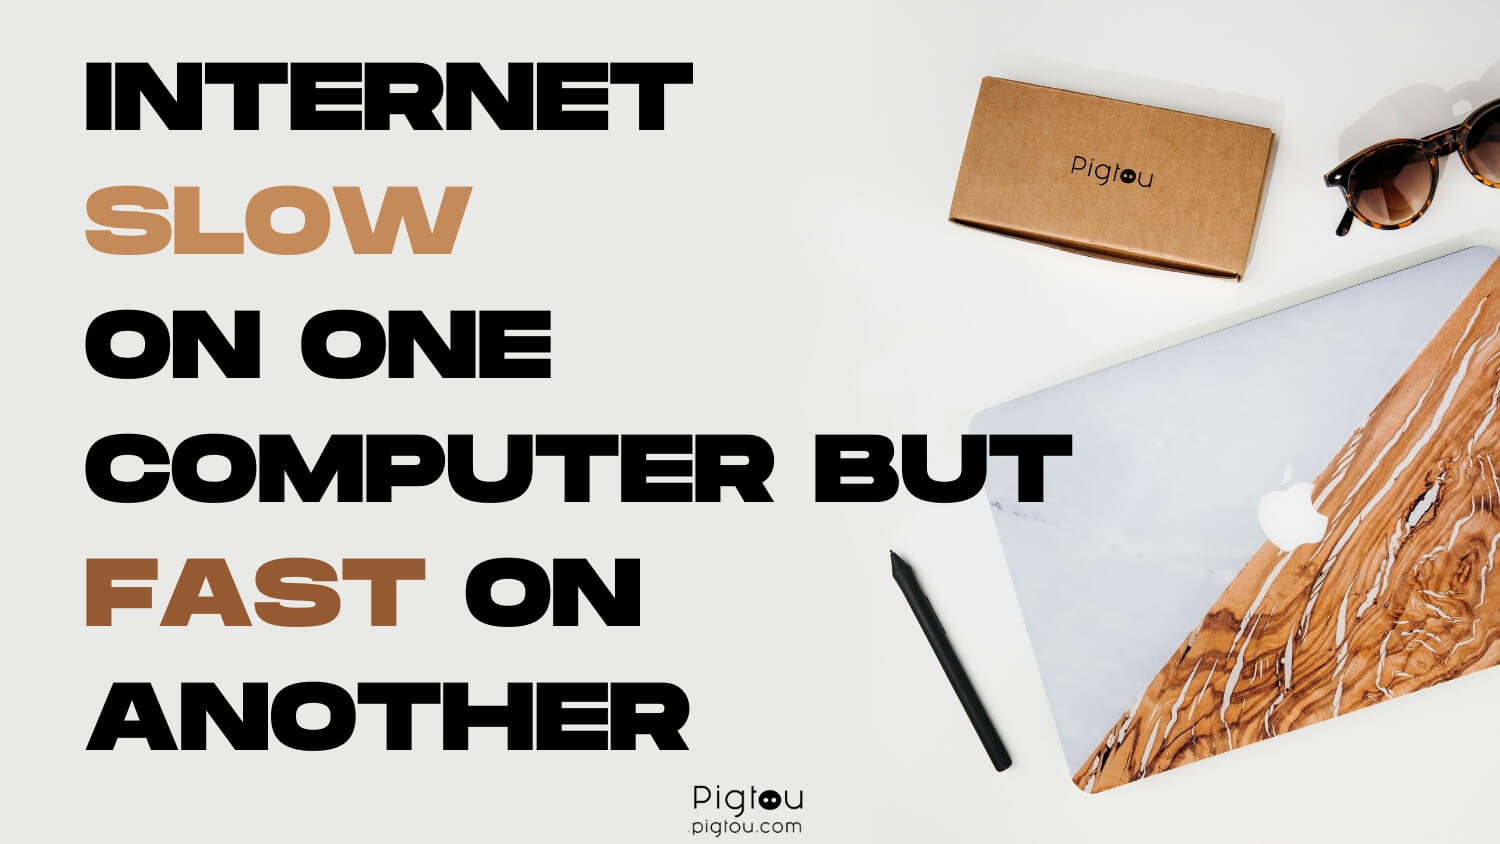 Fix Internet Slow on One Computer But Fast on Another